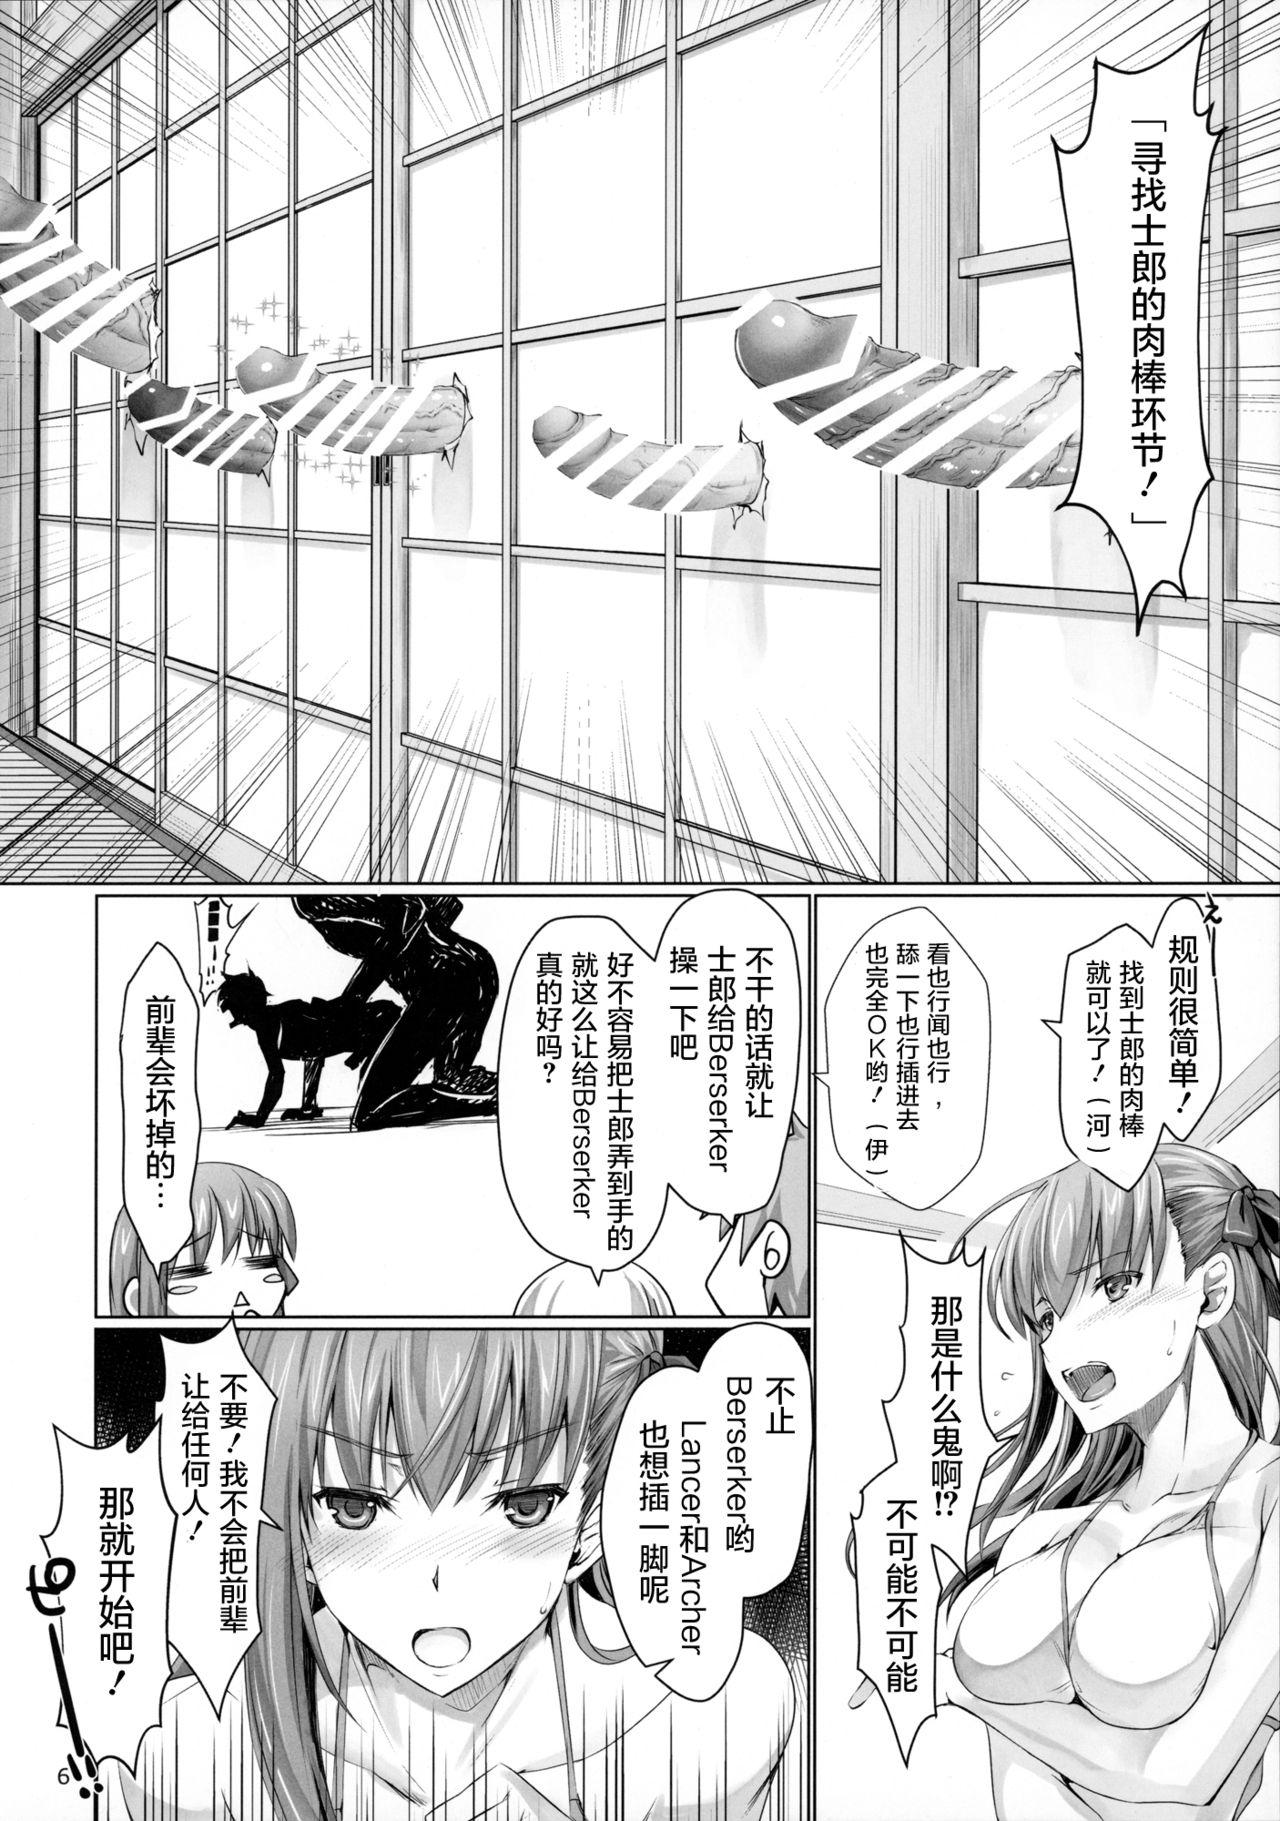 Teamskeet I miss you. - Fate stay night Pov Blow Job - Page 6